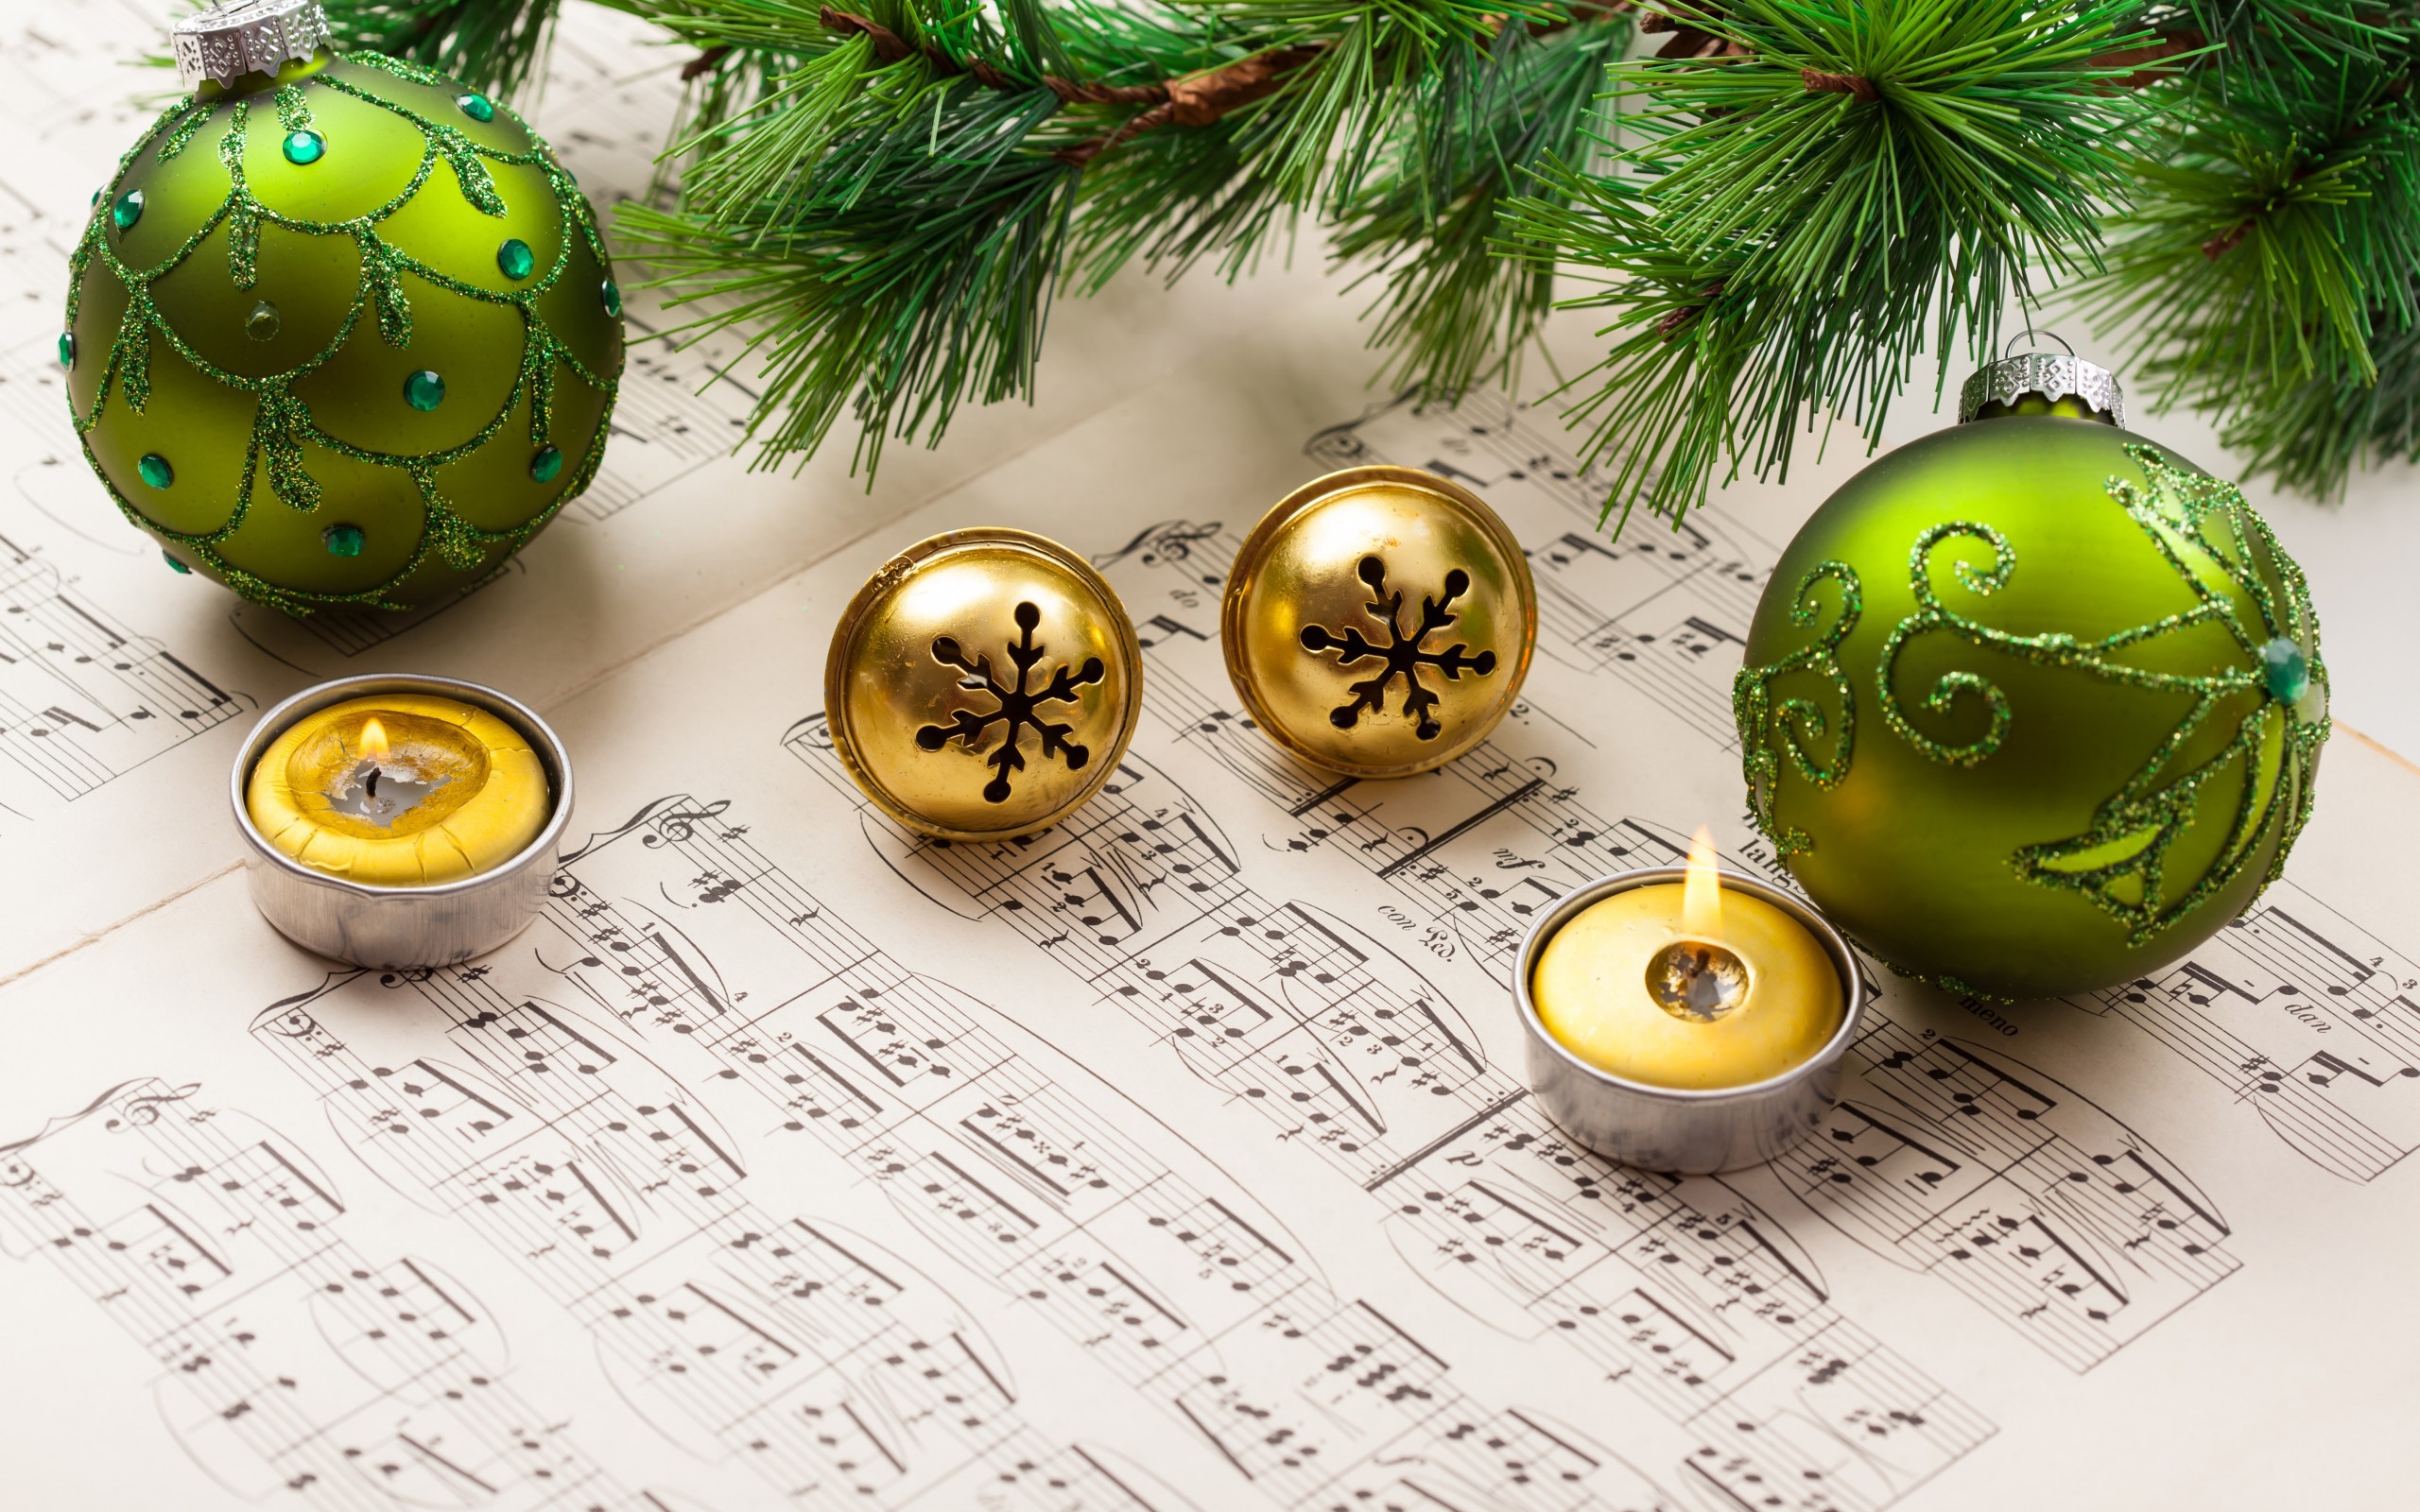 General 2560x1600 Christmas New Year musical notes Christmas ornaments  candles leaves holiday